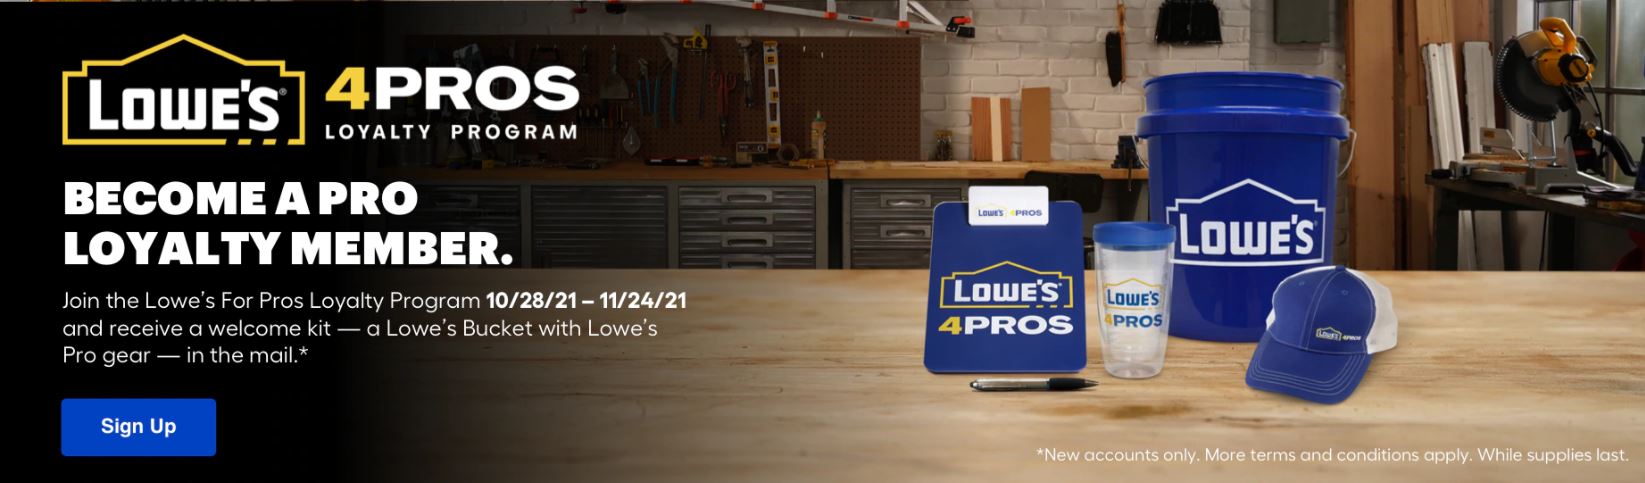 Business owners, Register for a Lowe's 4 Pros Loyalty account and receive FREE welcome kit (5 gallon bucket, hat, clipboard, pen, tumbler)